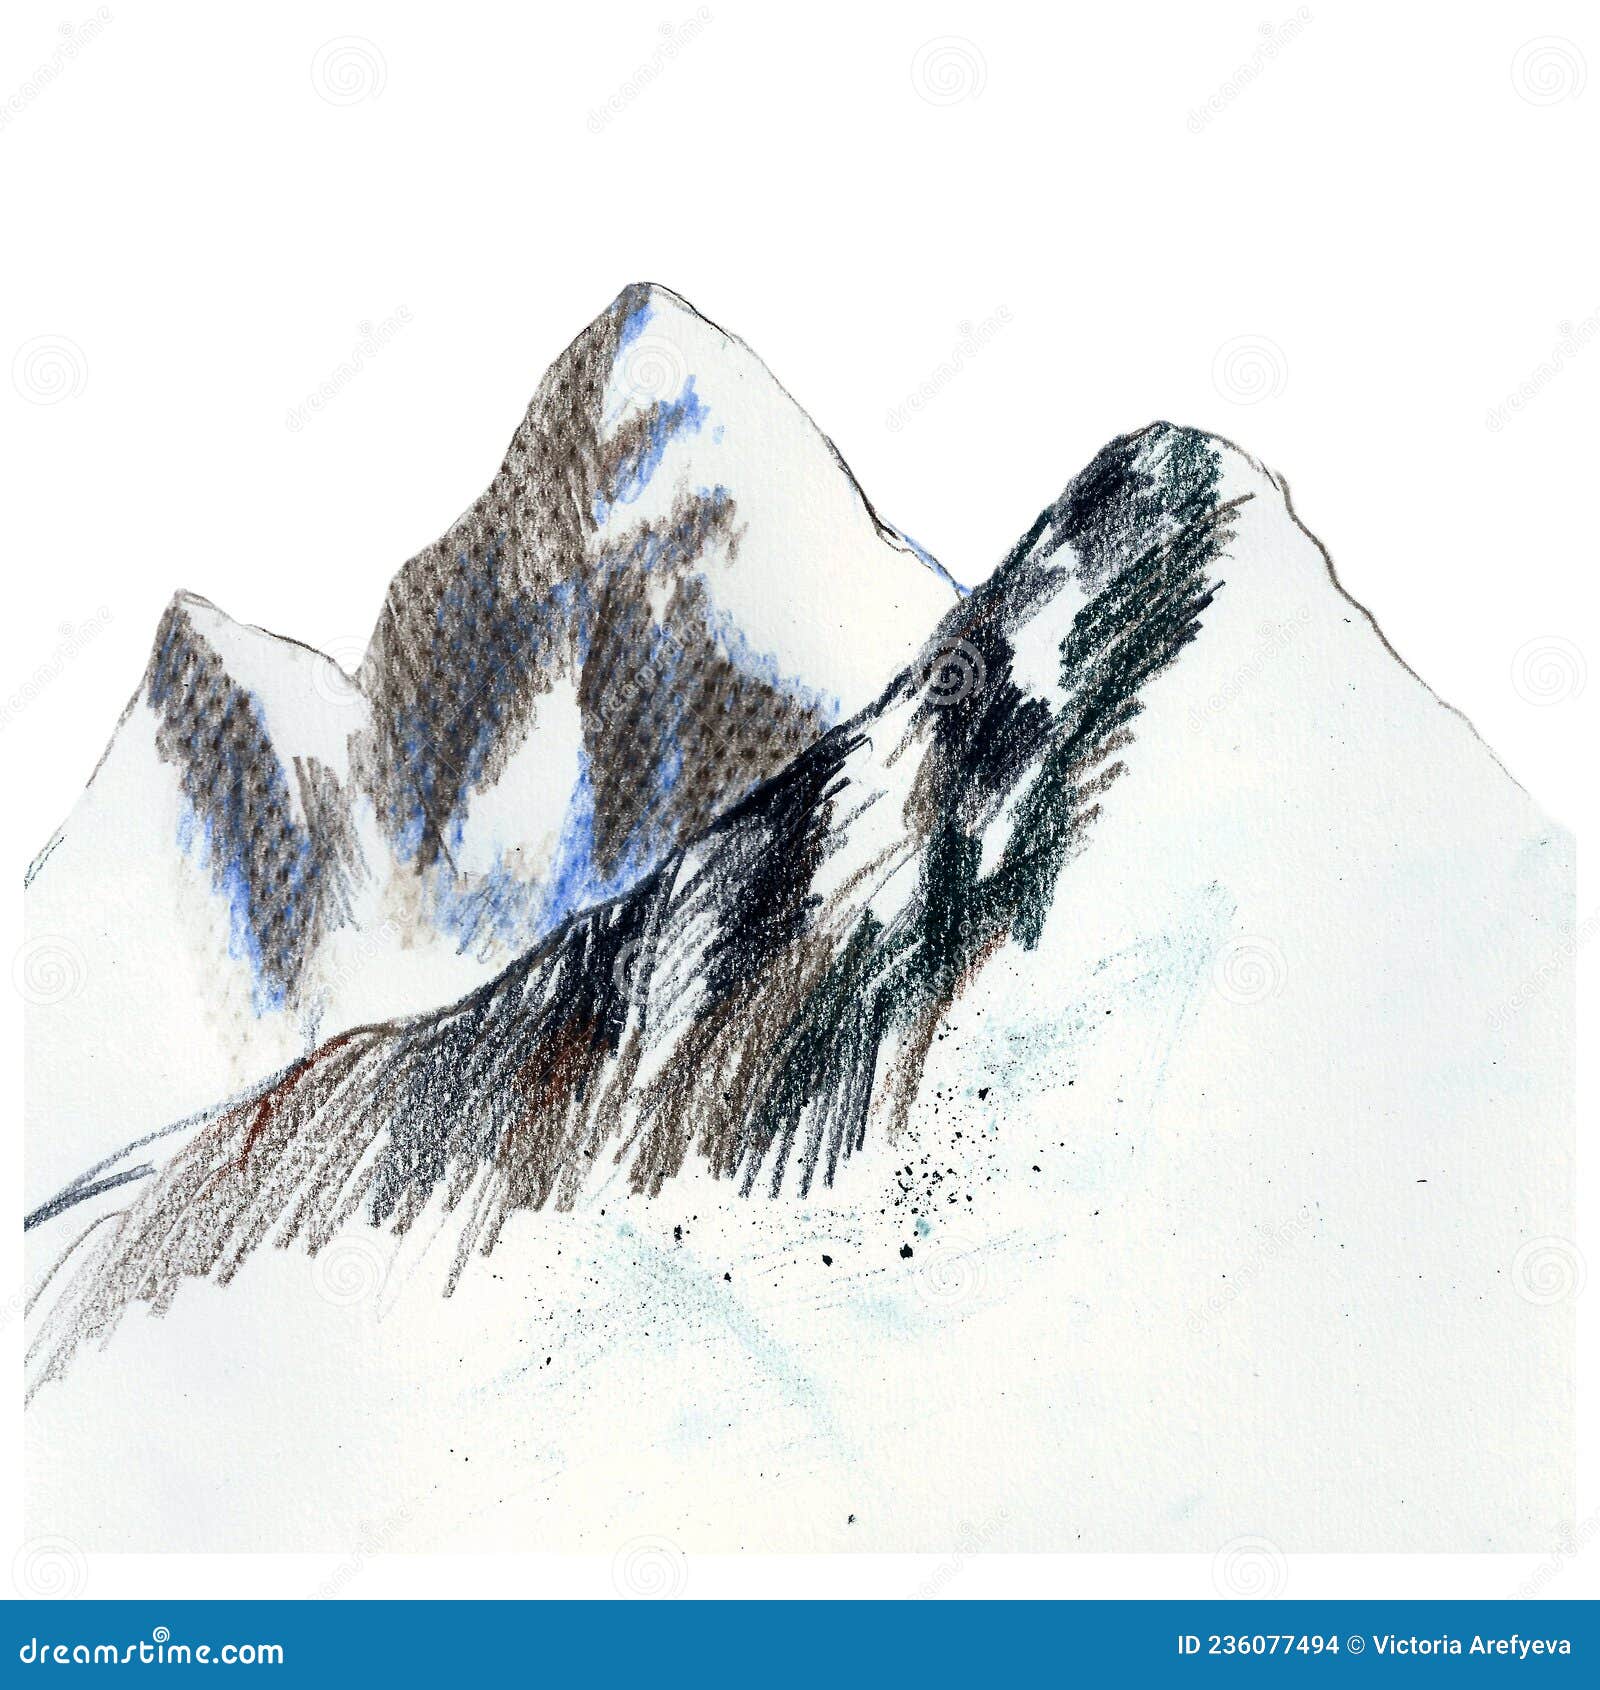 How to Draw Mt. Everest with Oil Pastels for Beginners Step by Step -  YouTube